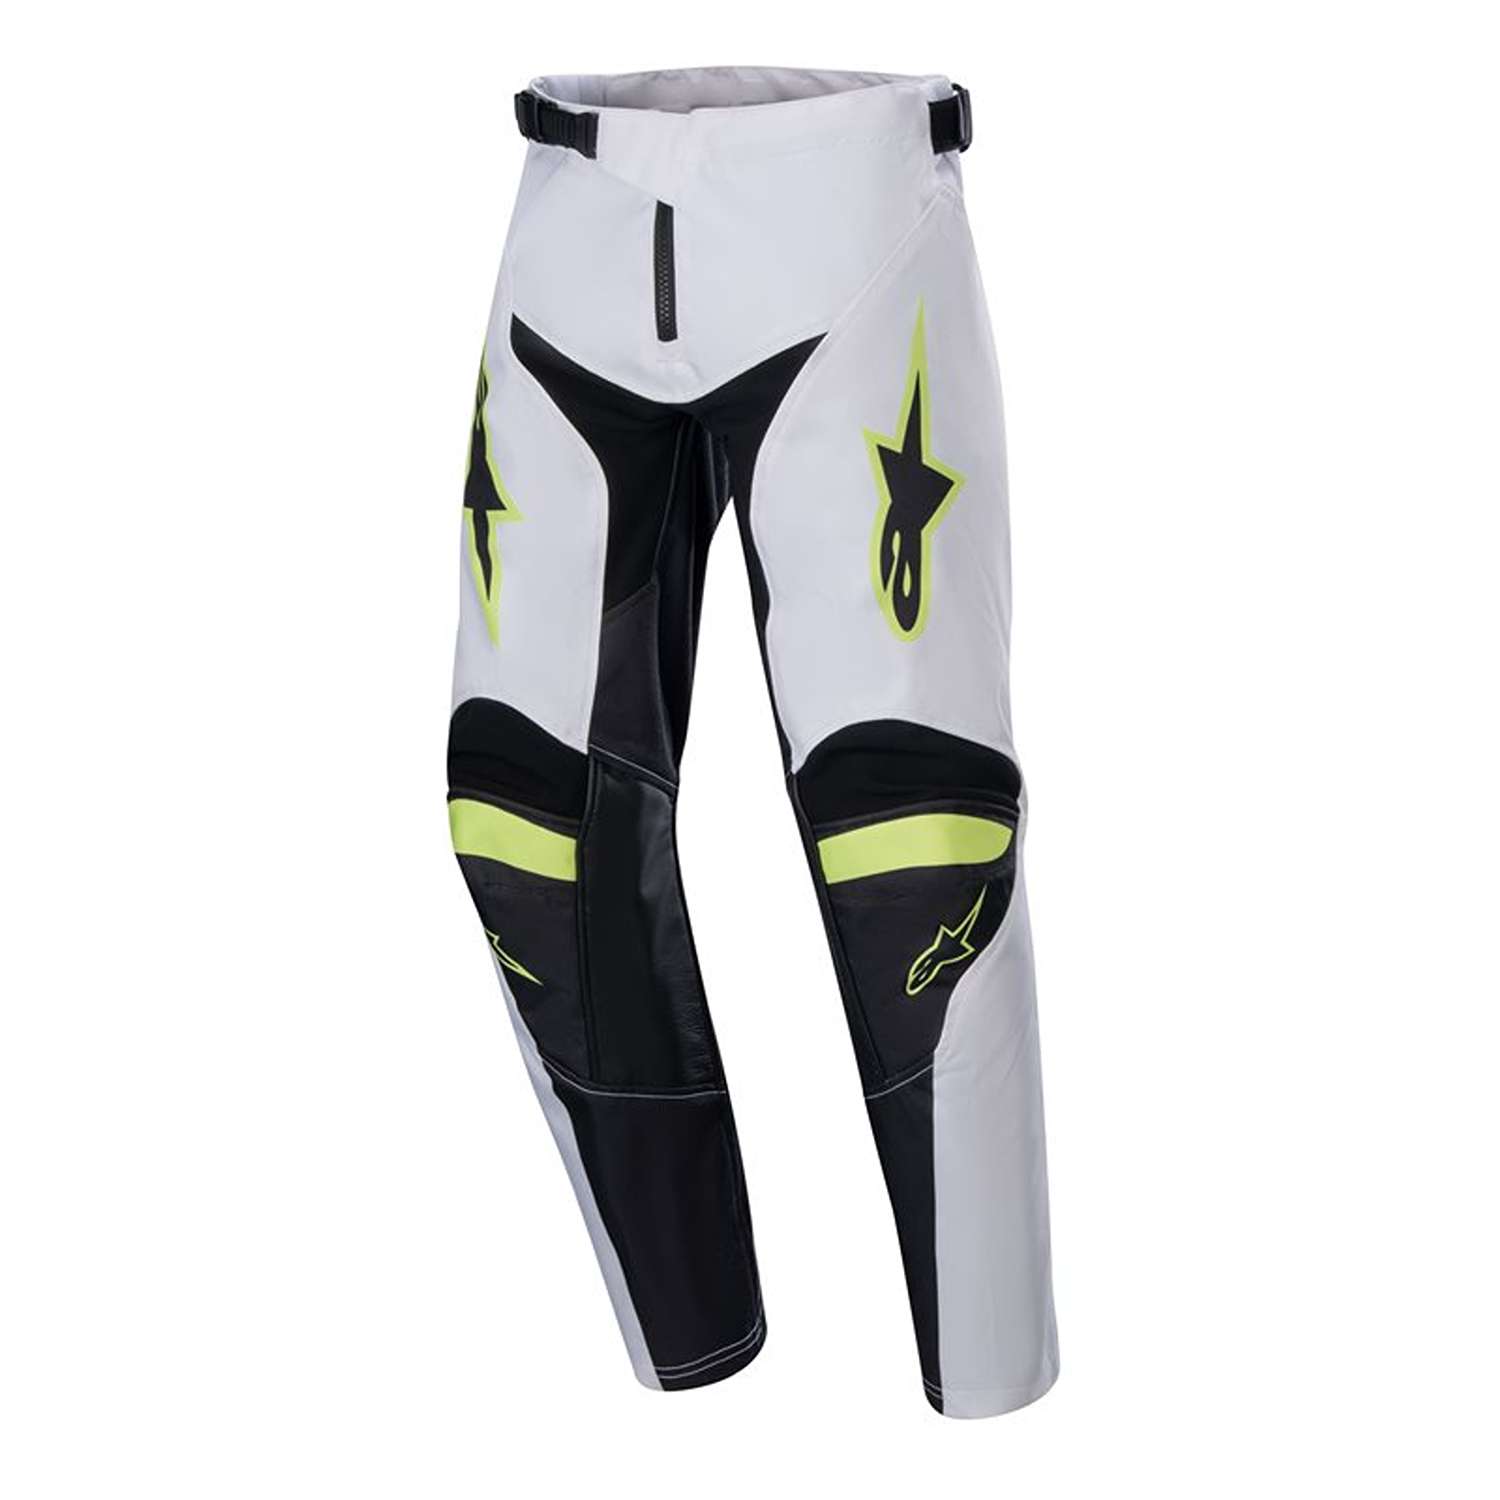 Image of EU Alpinestars Youth Racer Lucent Pants White Neon Red Yellow Fluo Taille 28